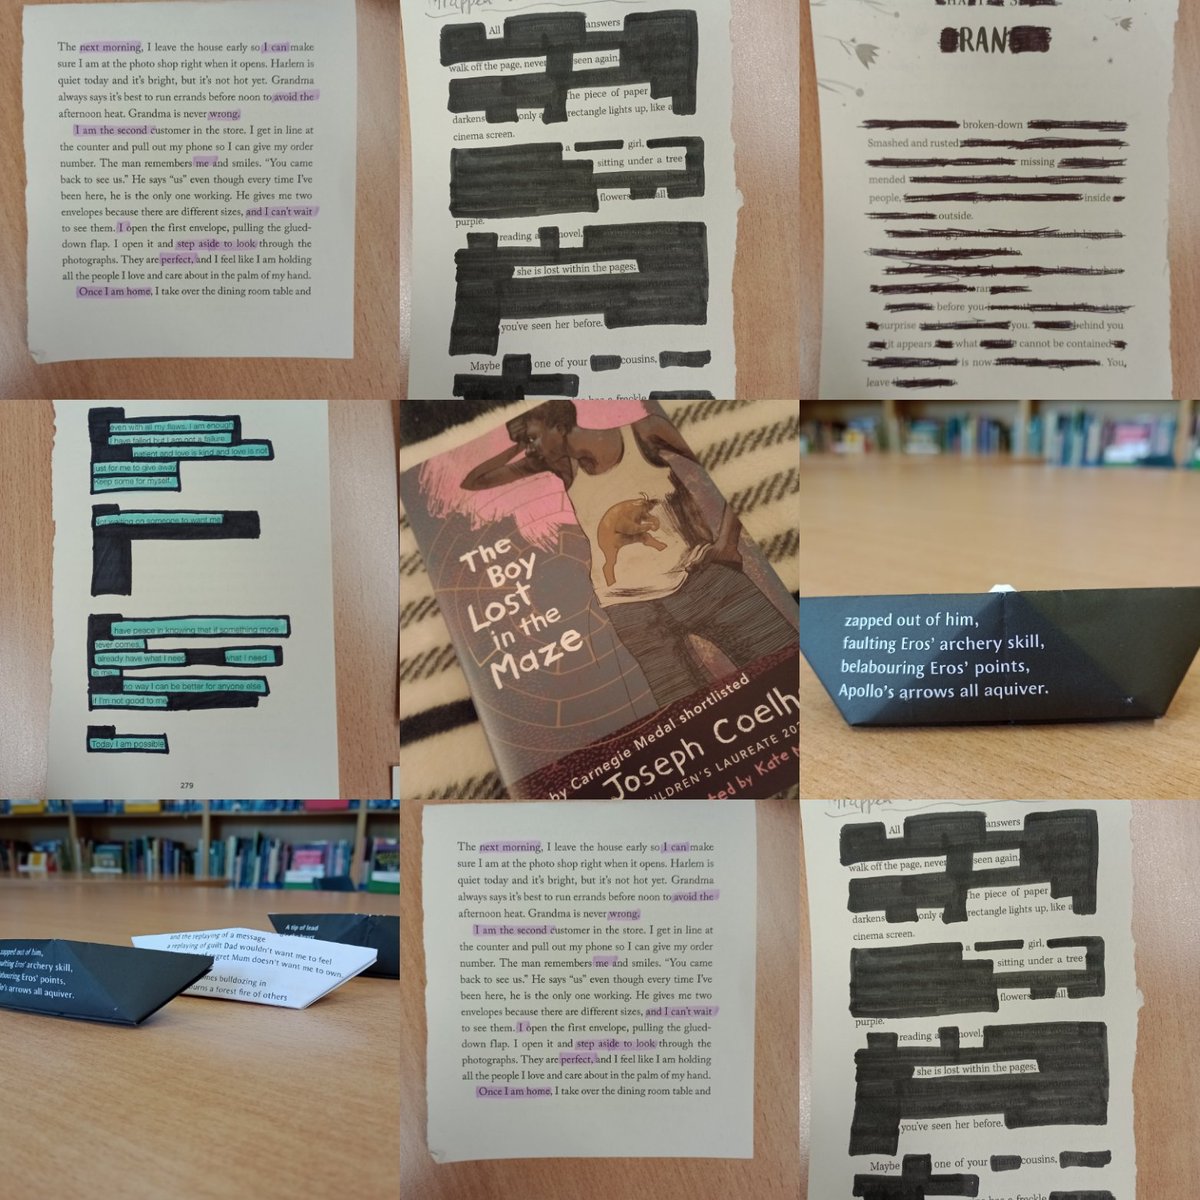 Happy #NationalPoetryDay from @kings_monkton Today, we have been making #blackoutpoems and sharing favourite lines/verses from @JosephACoelho #TheGirlWhoBecameATree using origami boats #poetry #SchoolLibraries